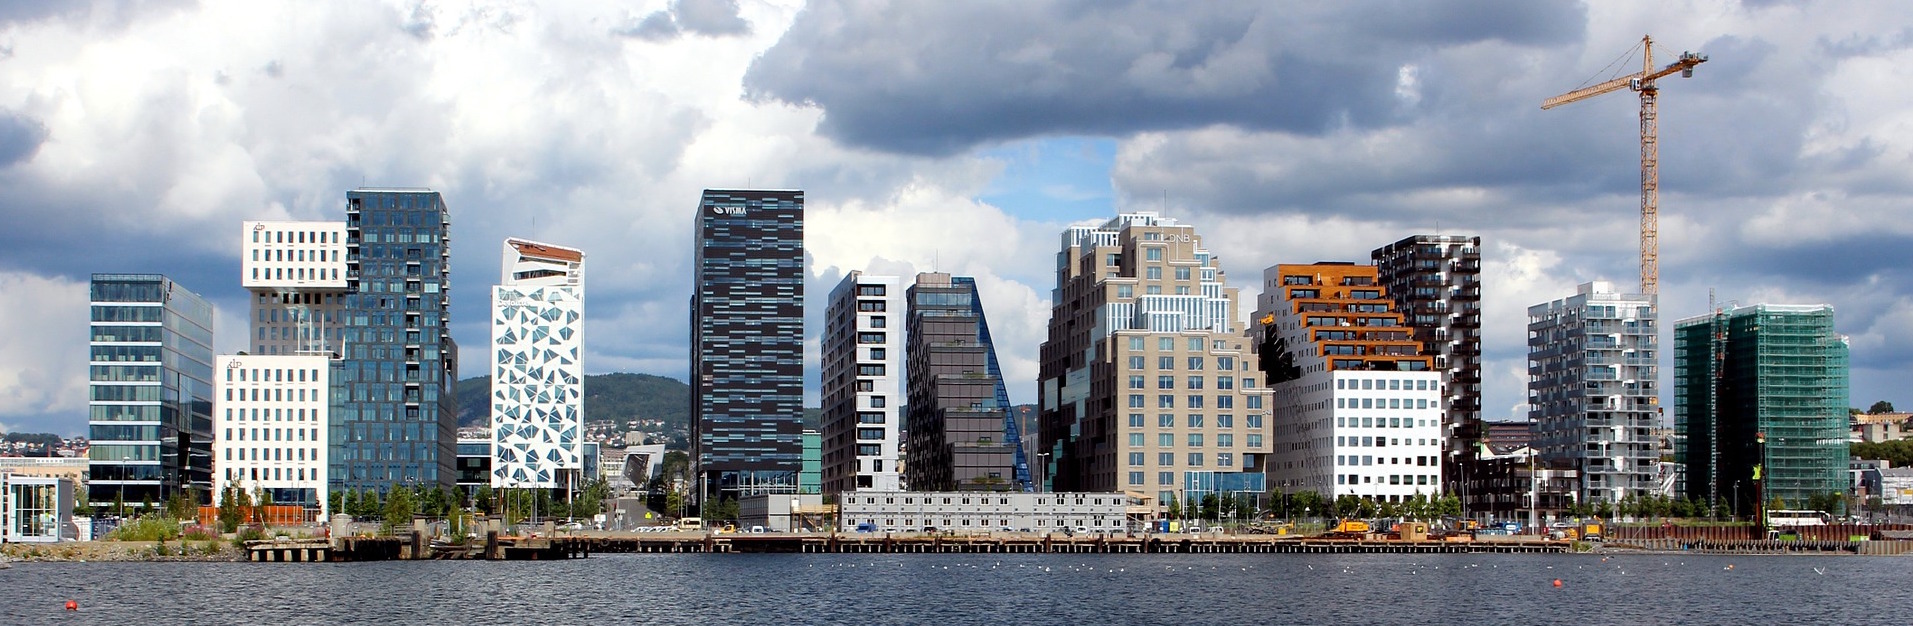 Oslo, Norway skyline with tower blocks on the water front